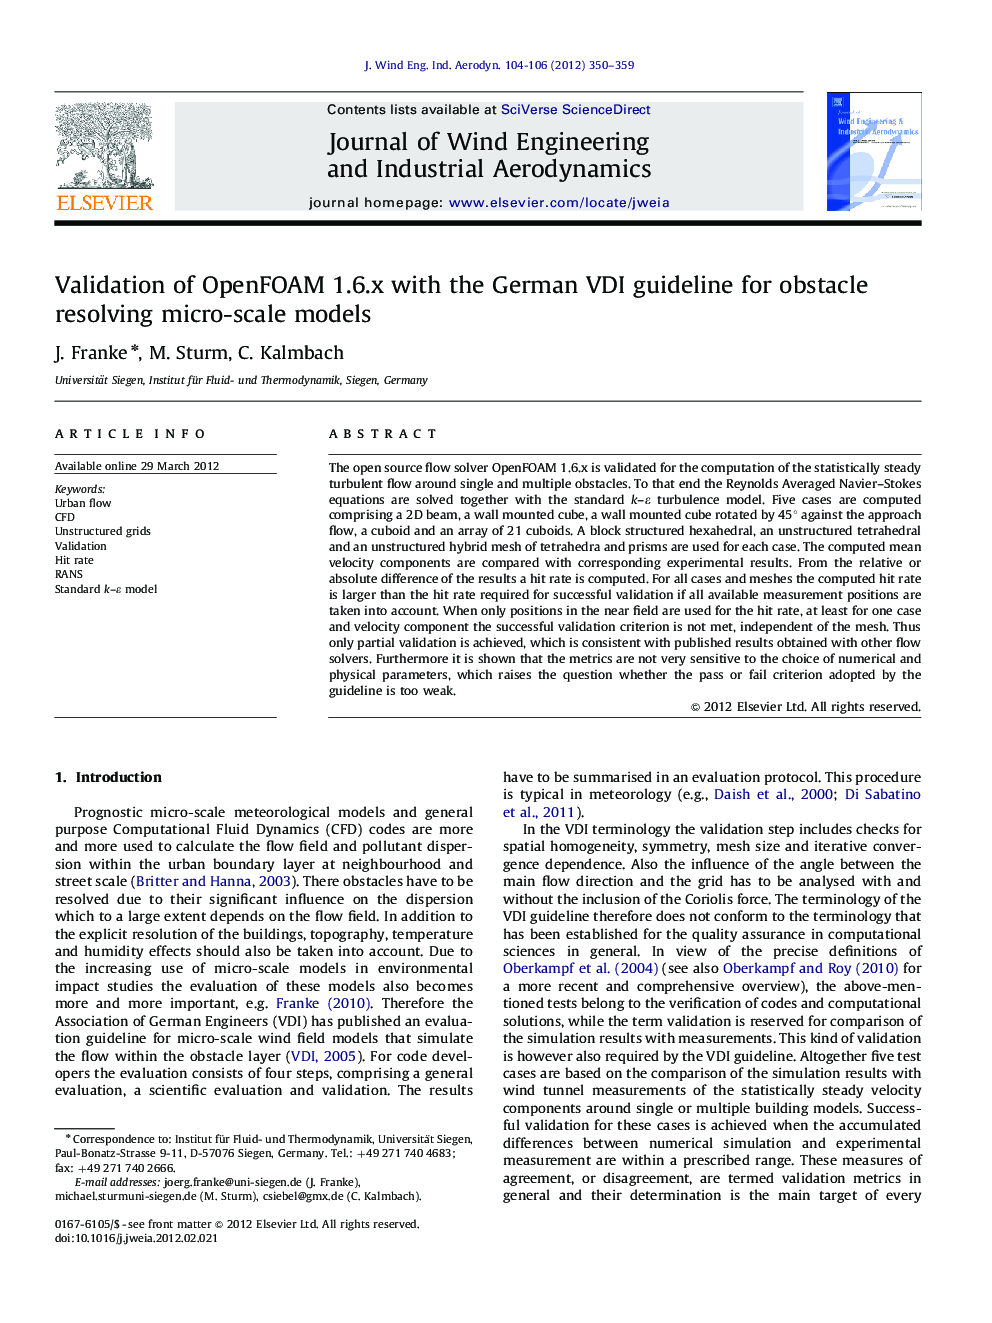 Validation of OpenFOAM 1.6.x with the German VDI guideline for obstacle resolving micro-scale models